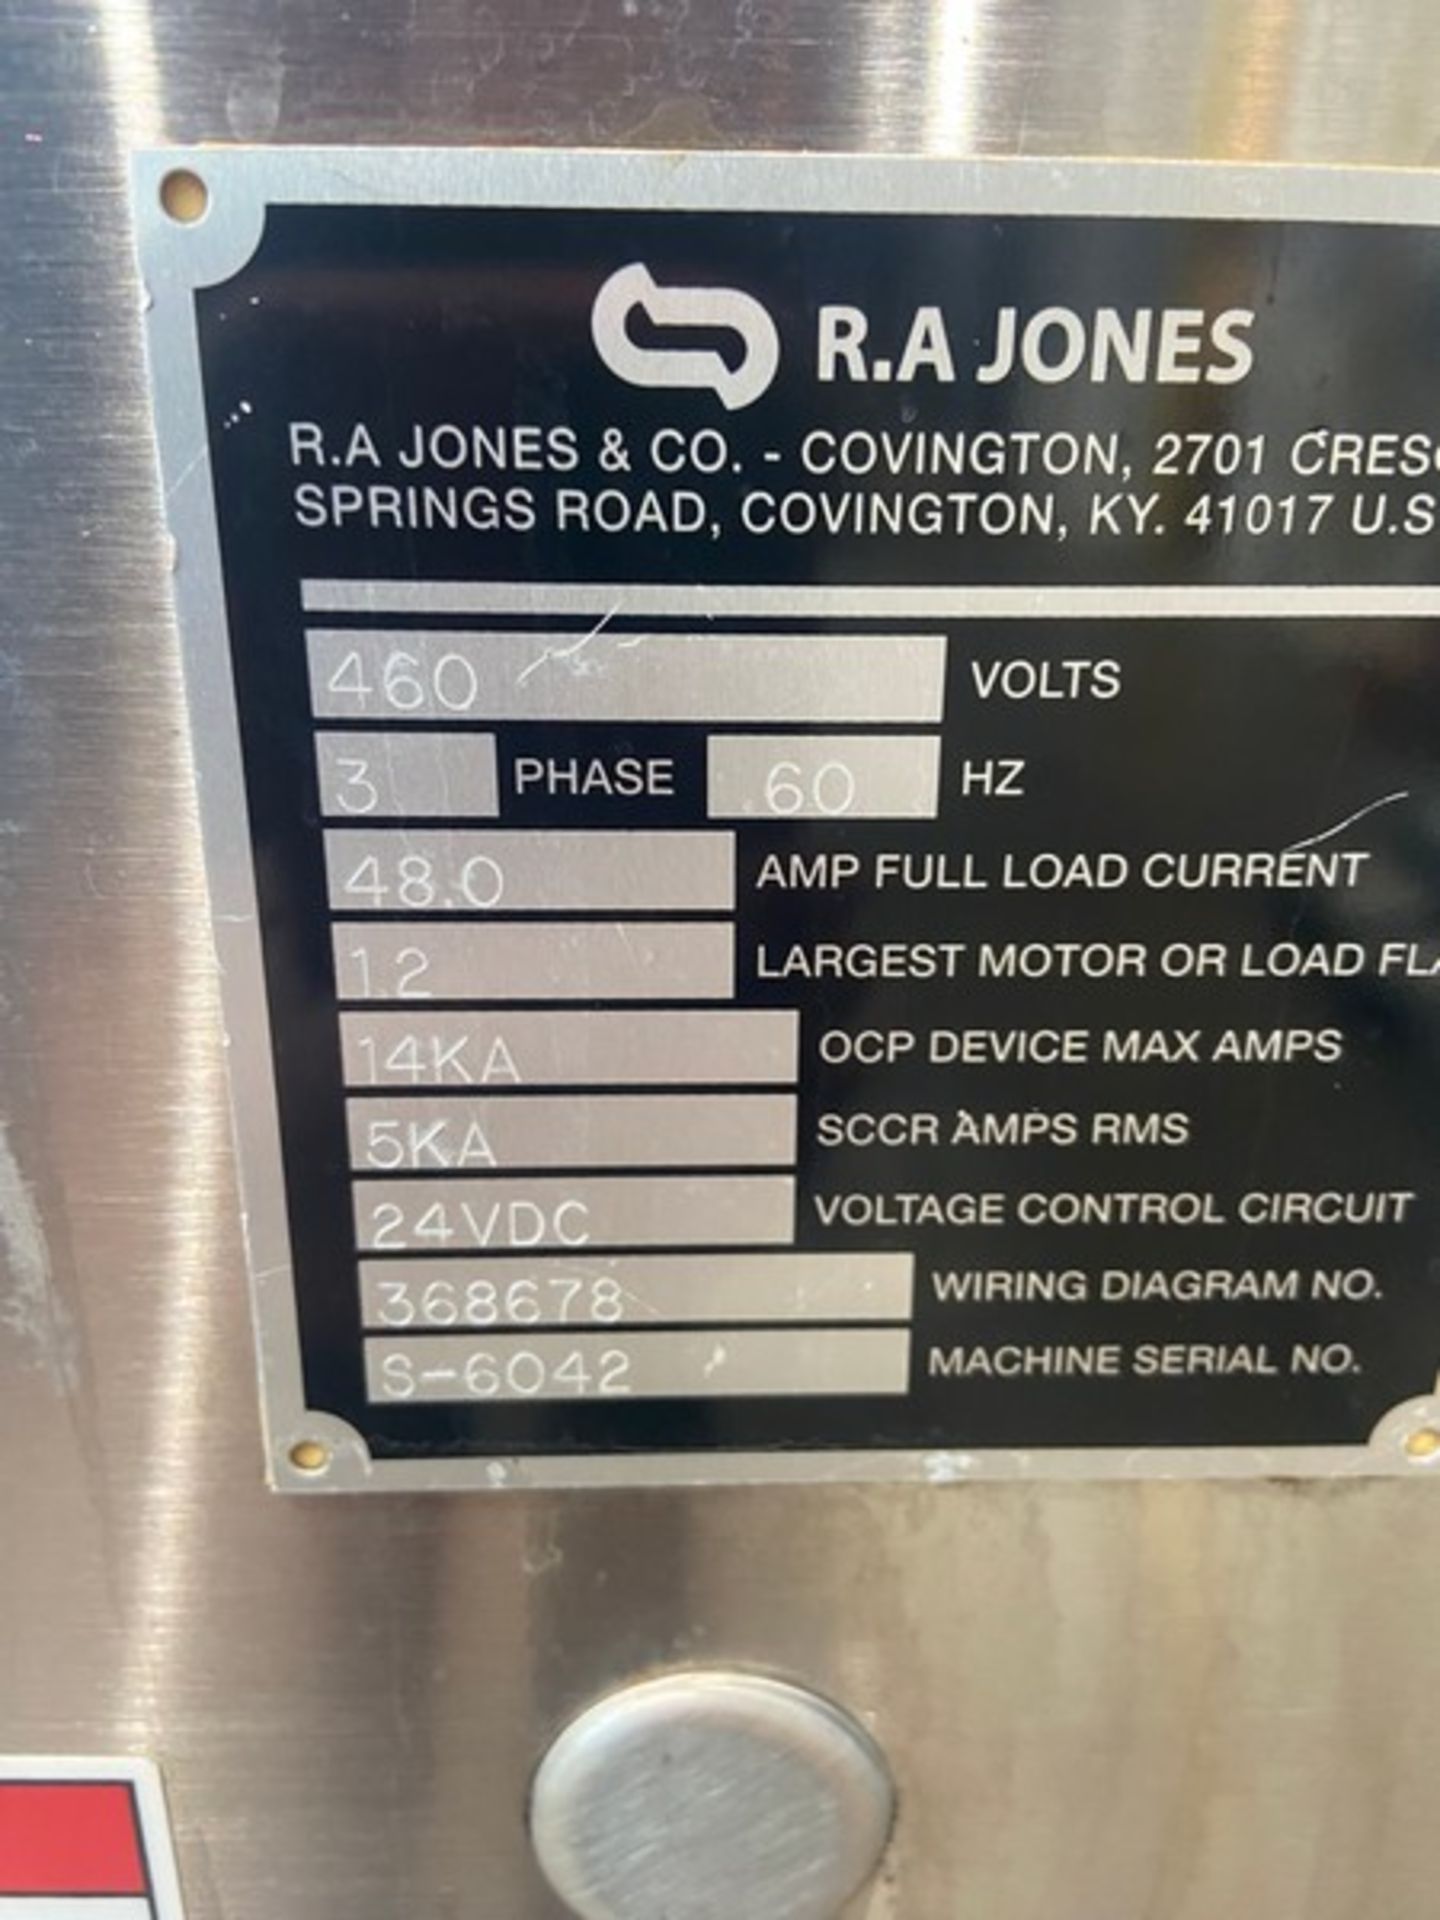 R.A. Jones Pouch King Pouch Filler, M/N S-6042, S/N S-6042, 460 Volts, 3 Phase, with On Board - Image 16 of 20